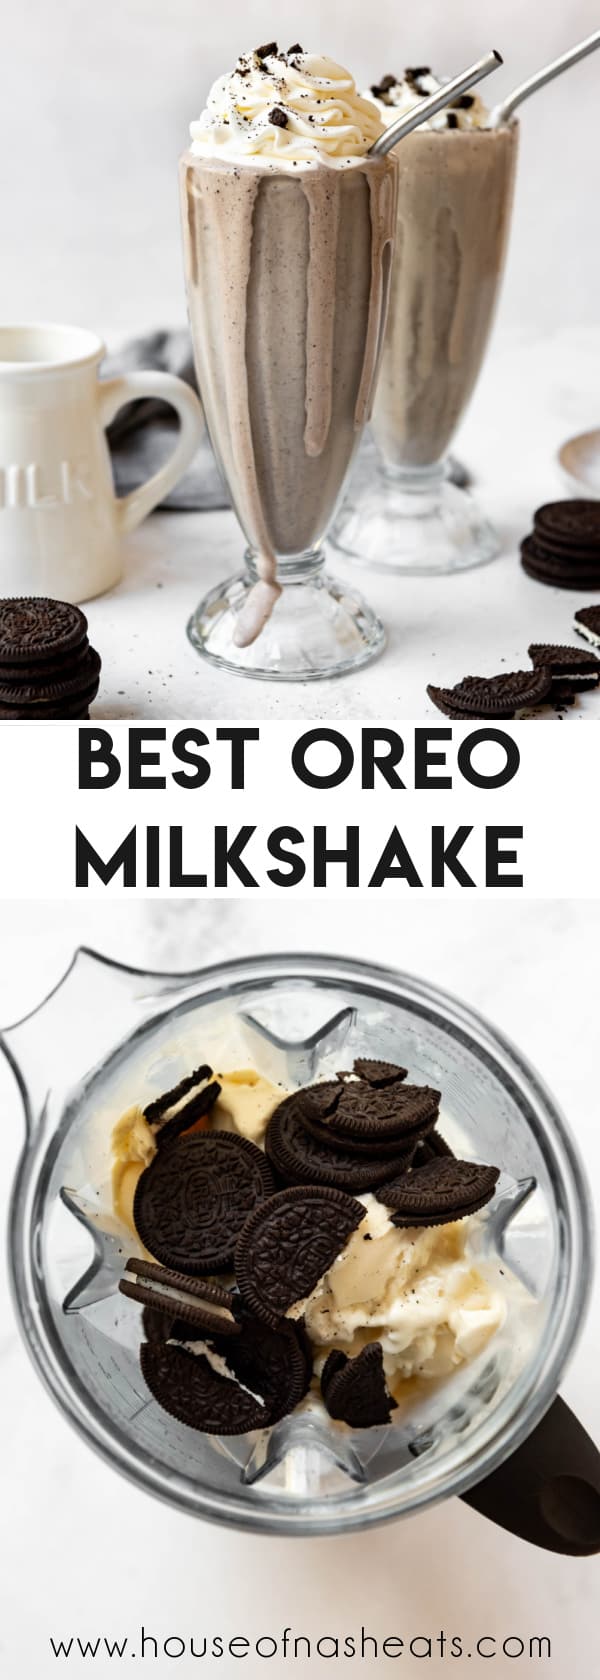 A collage of images of making an oreo milkshake with text overlay.